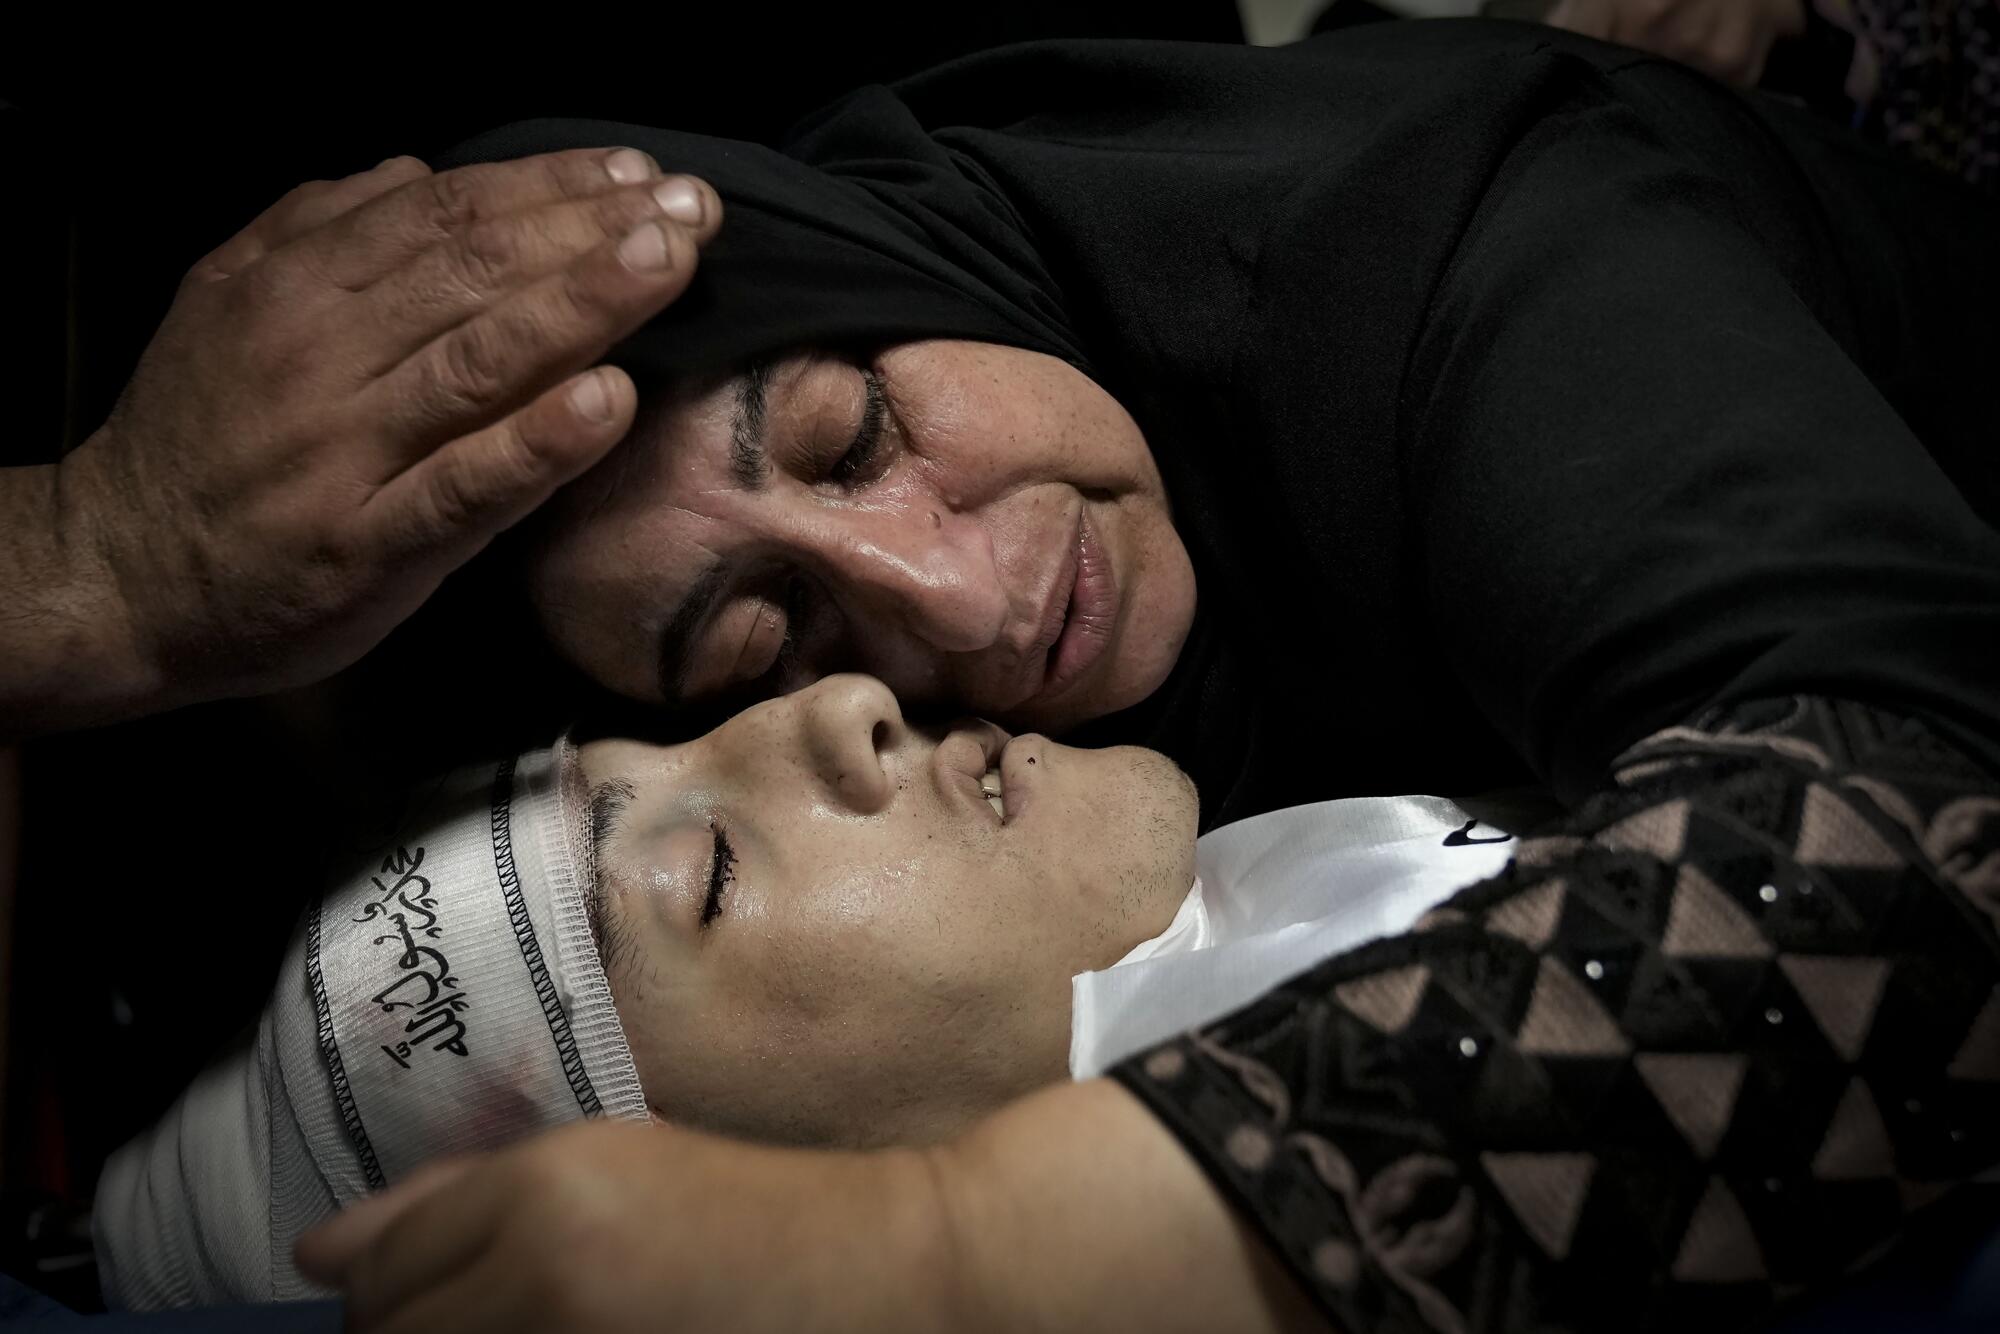 Palestinian relatives mourn over the body of a woman who was killed.